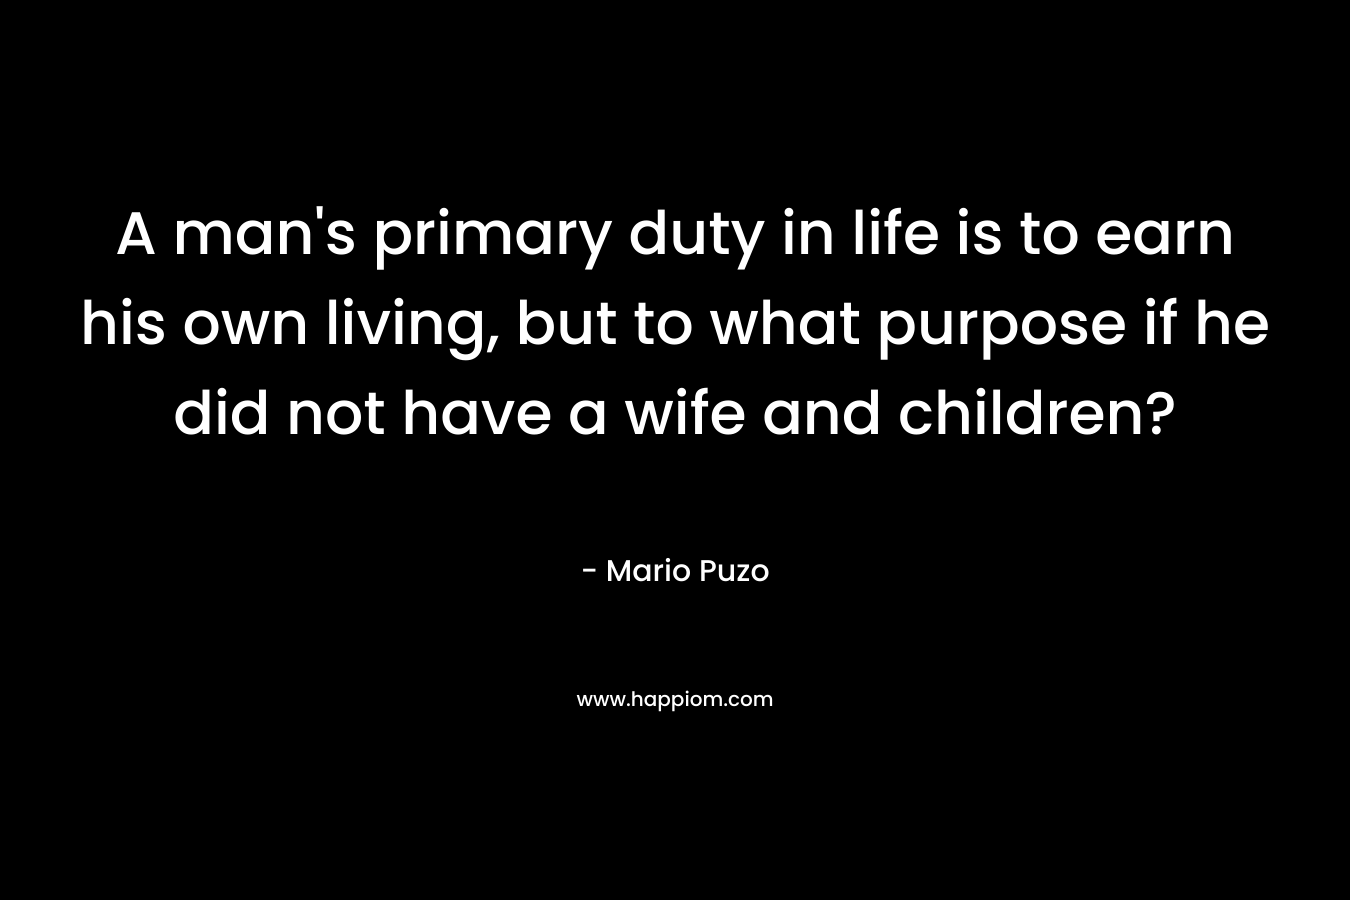 A man's primary duty in life is to earn his own living, but to what purpose if he did not have a wife and children?